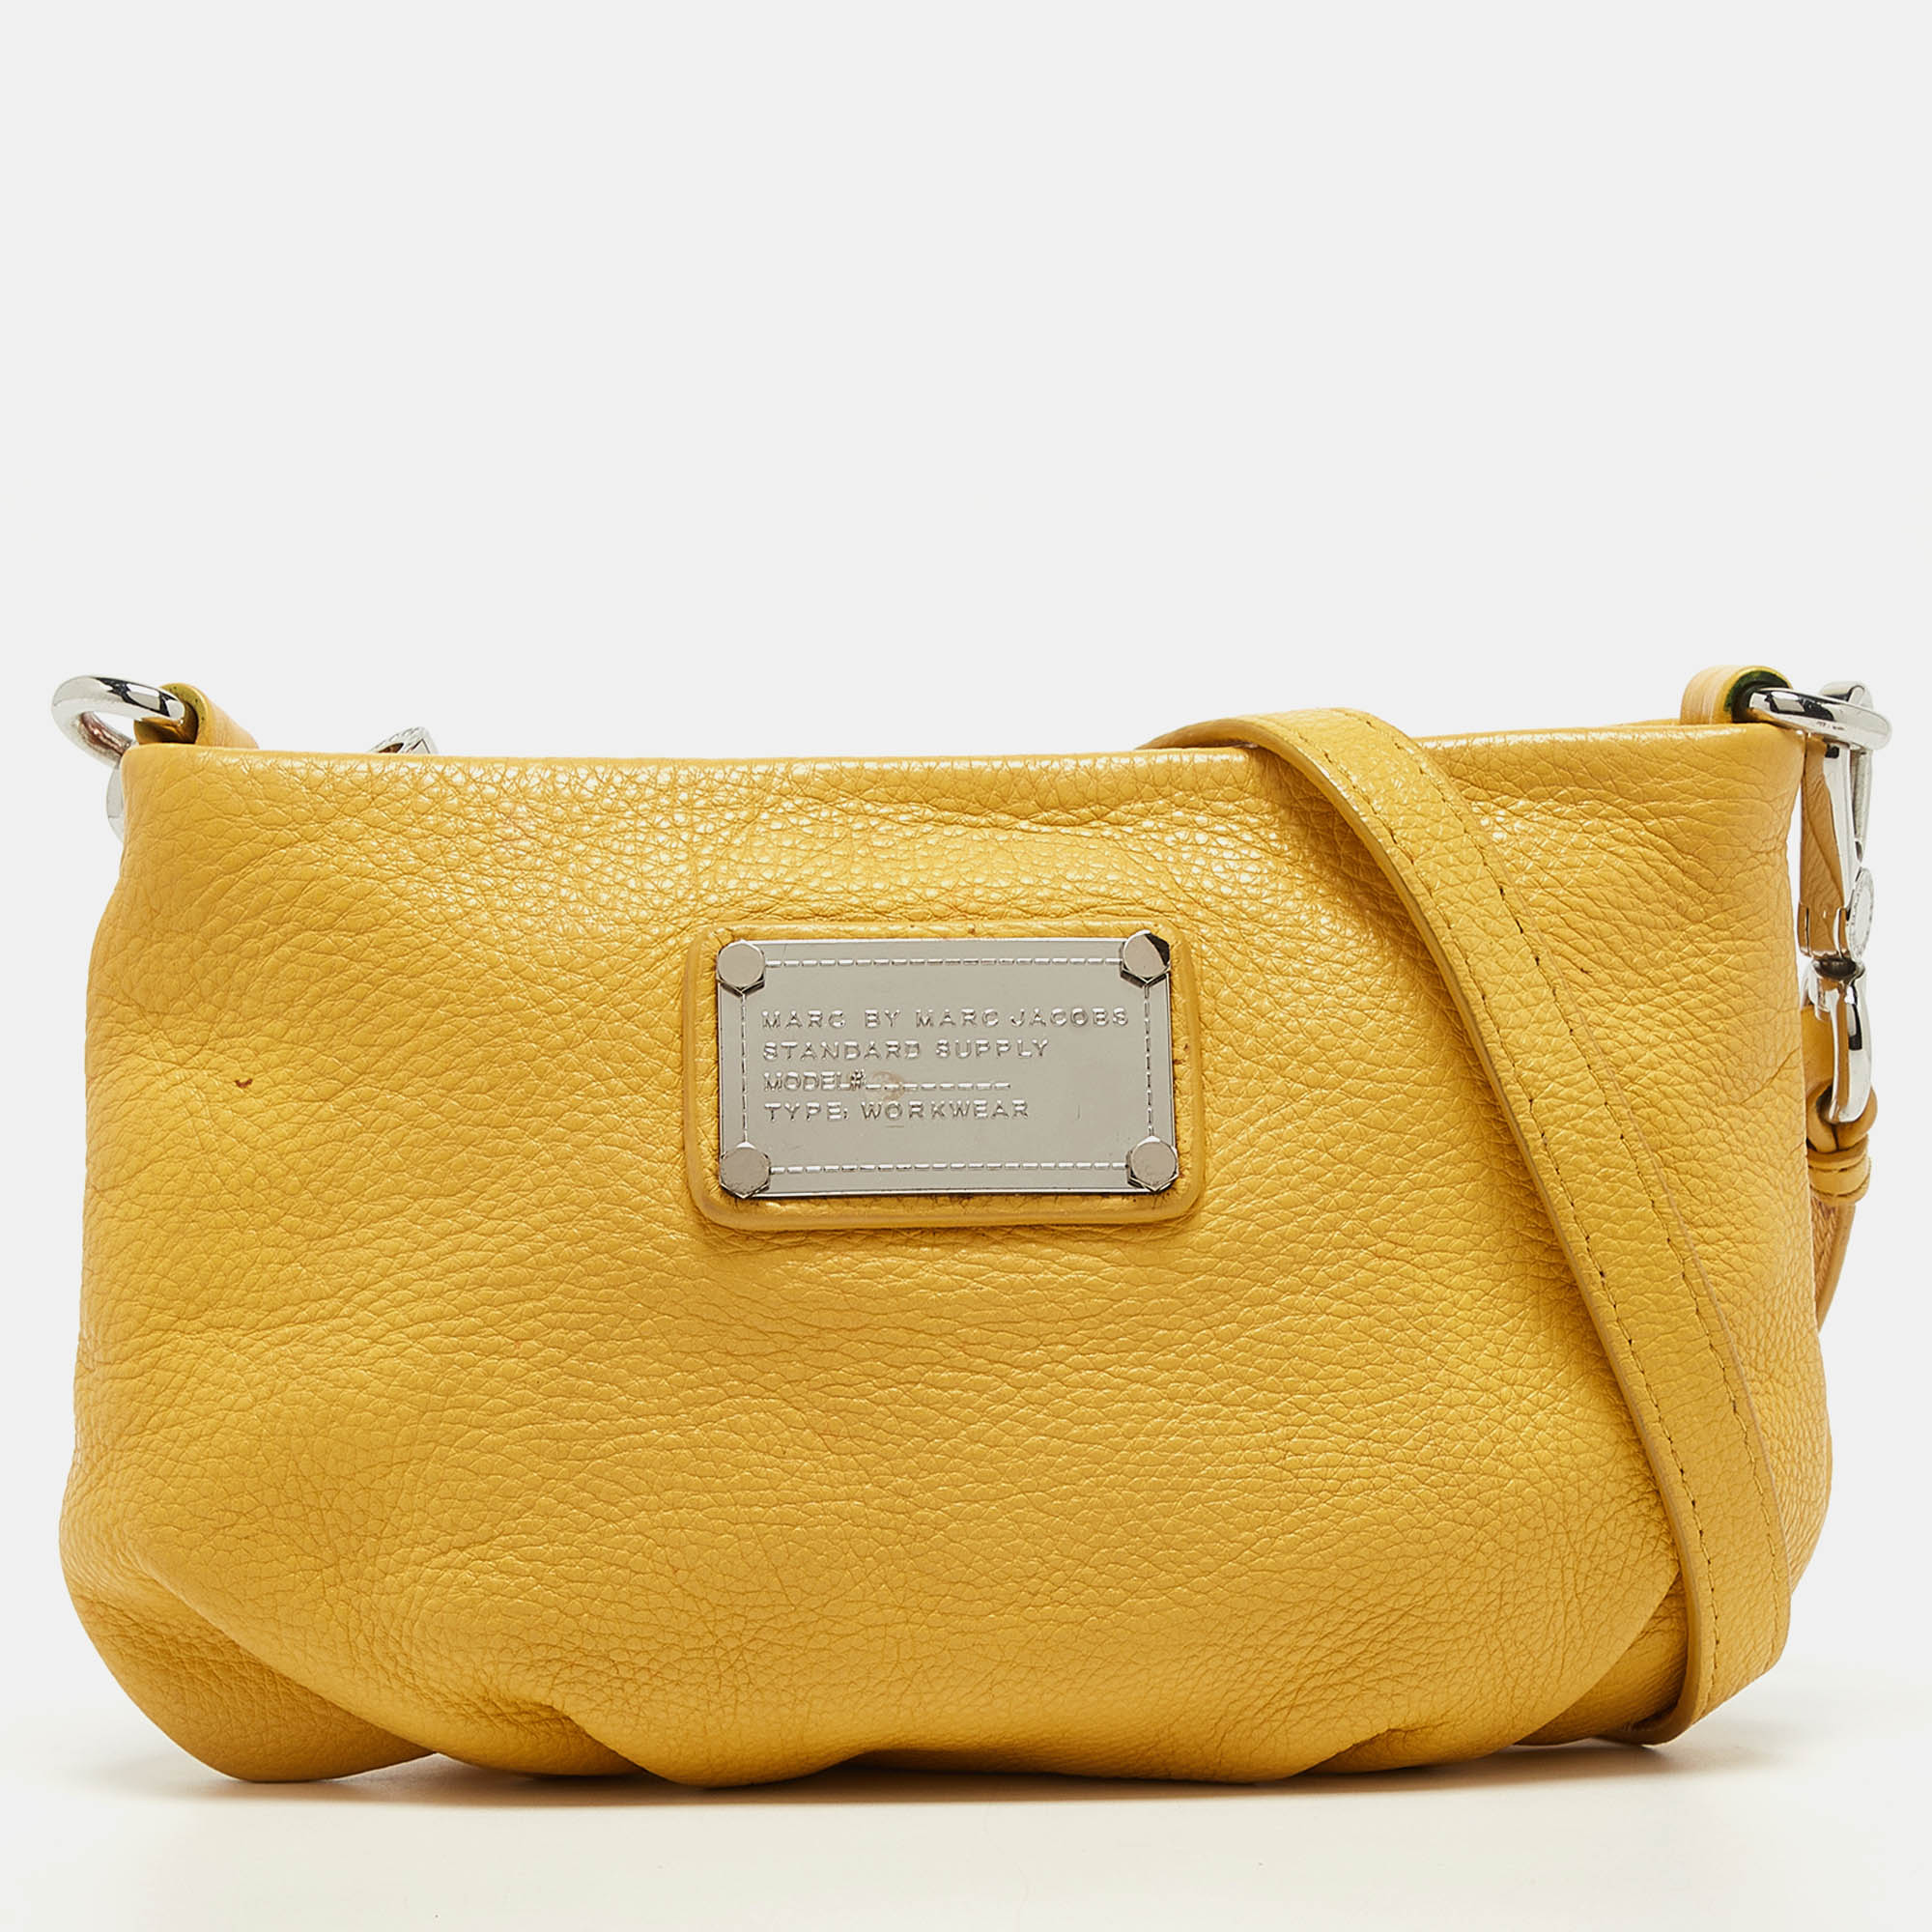 Marc by marc jacobs yellow leather classic q percy crossbody bag